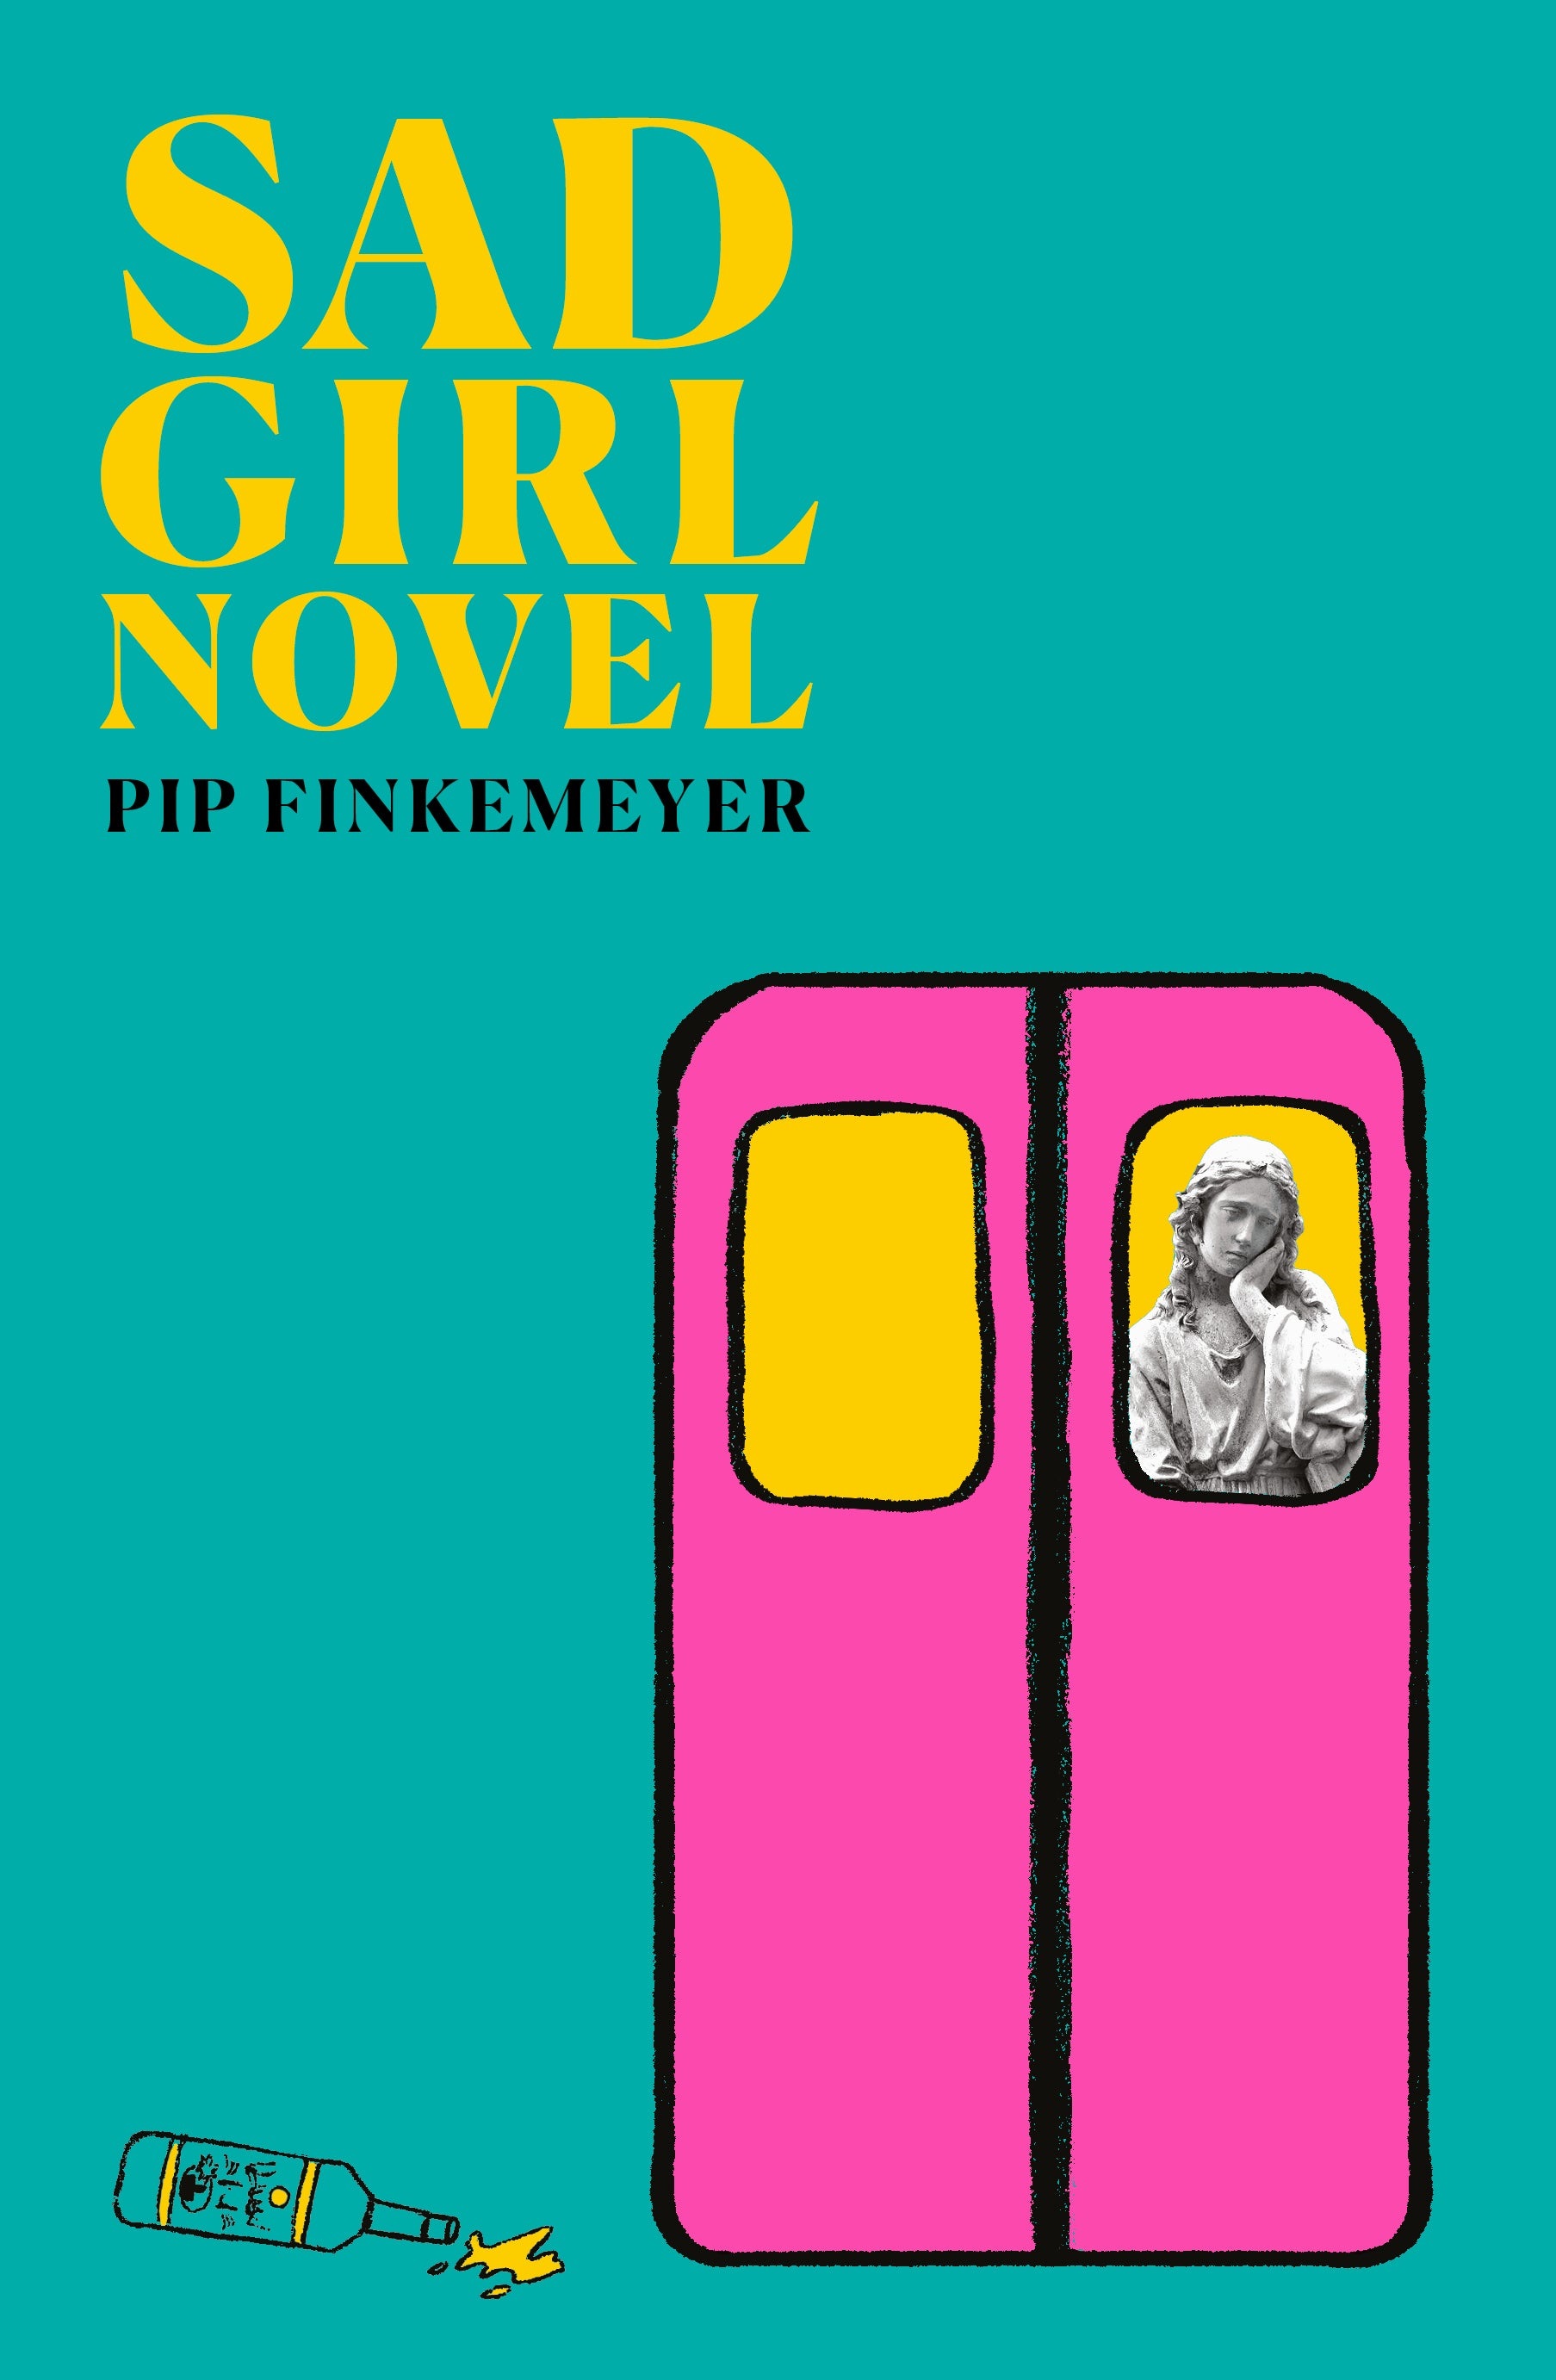 A book cover with an illustration of a pink train carriage door on a green background; an empty alcohol bottle lies on its side